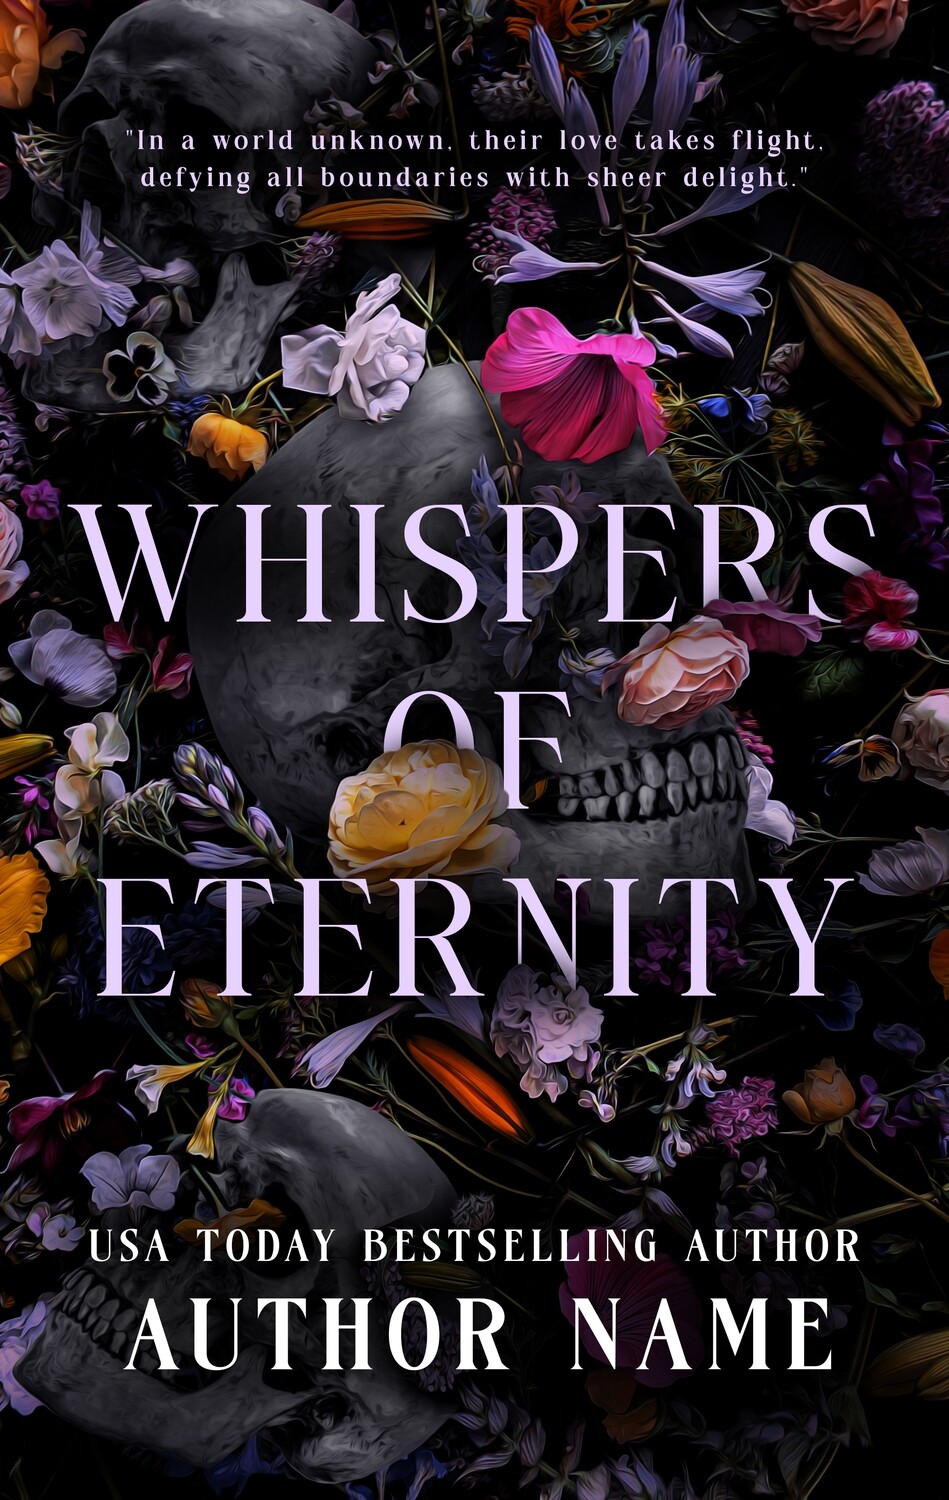 WHISPERS OF ETERNITY